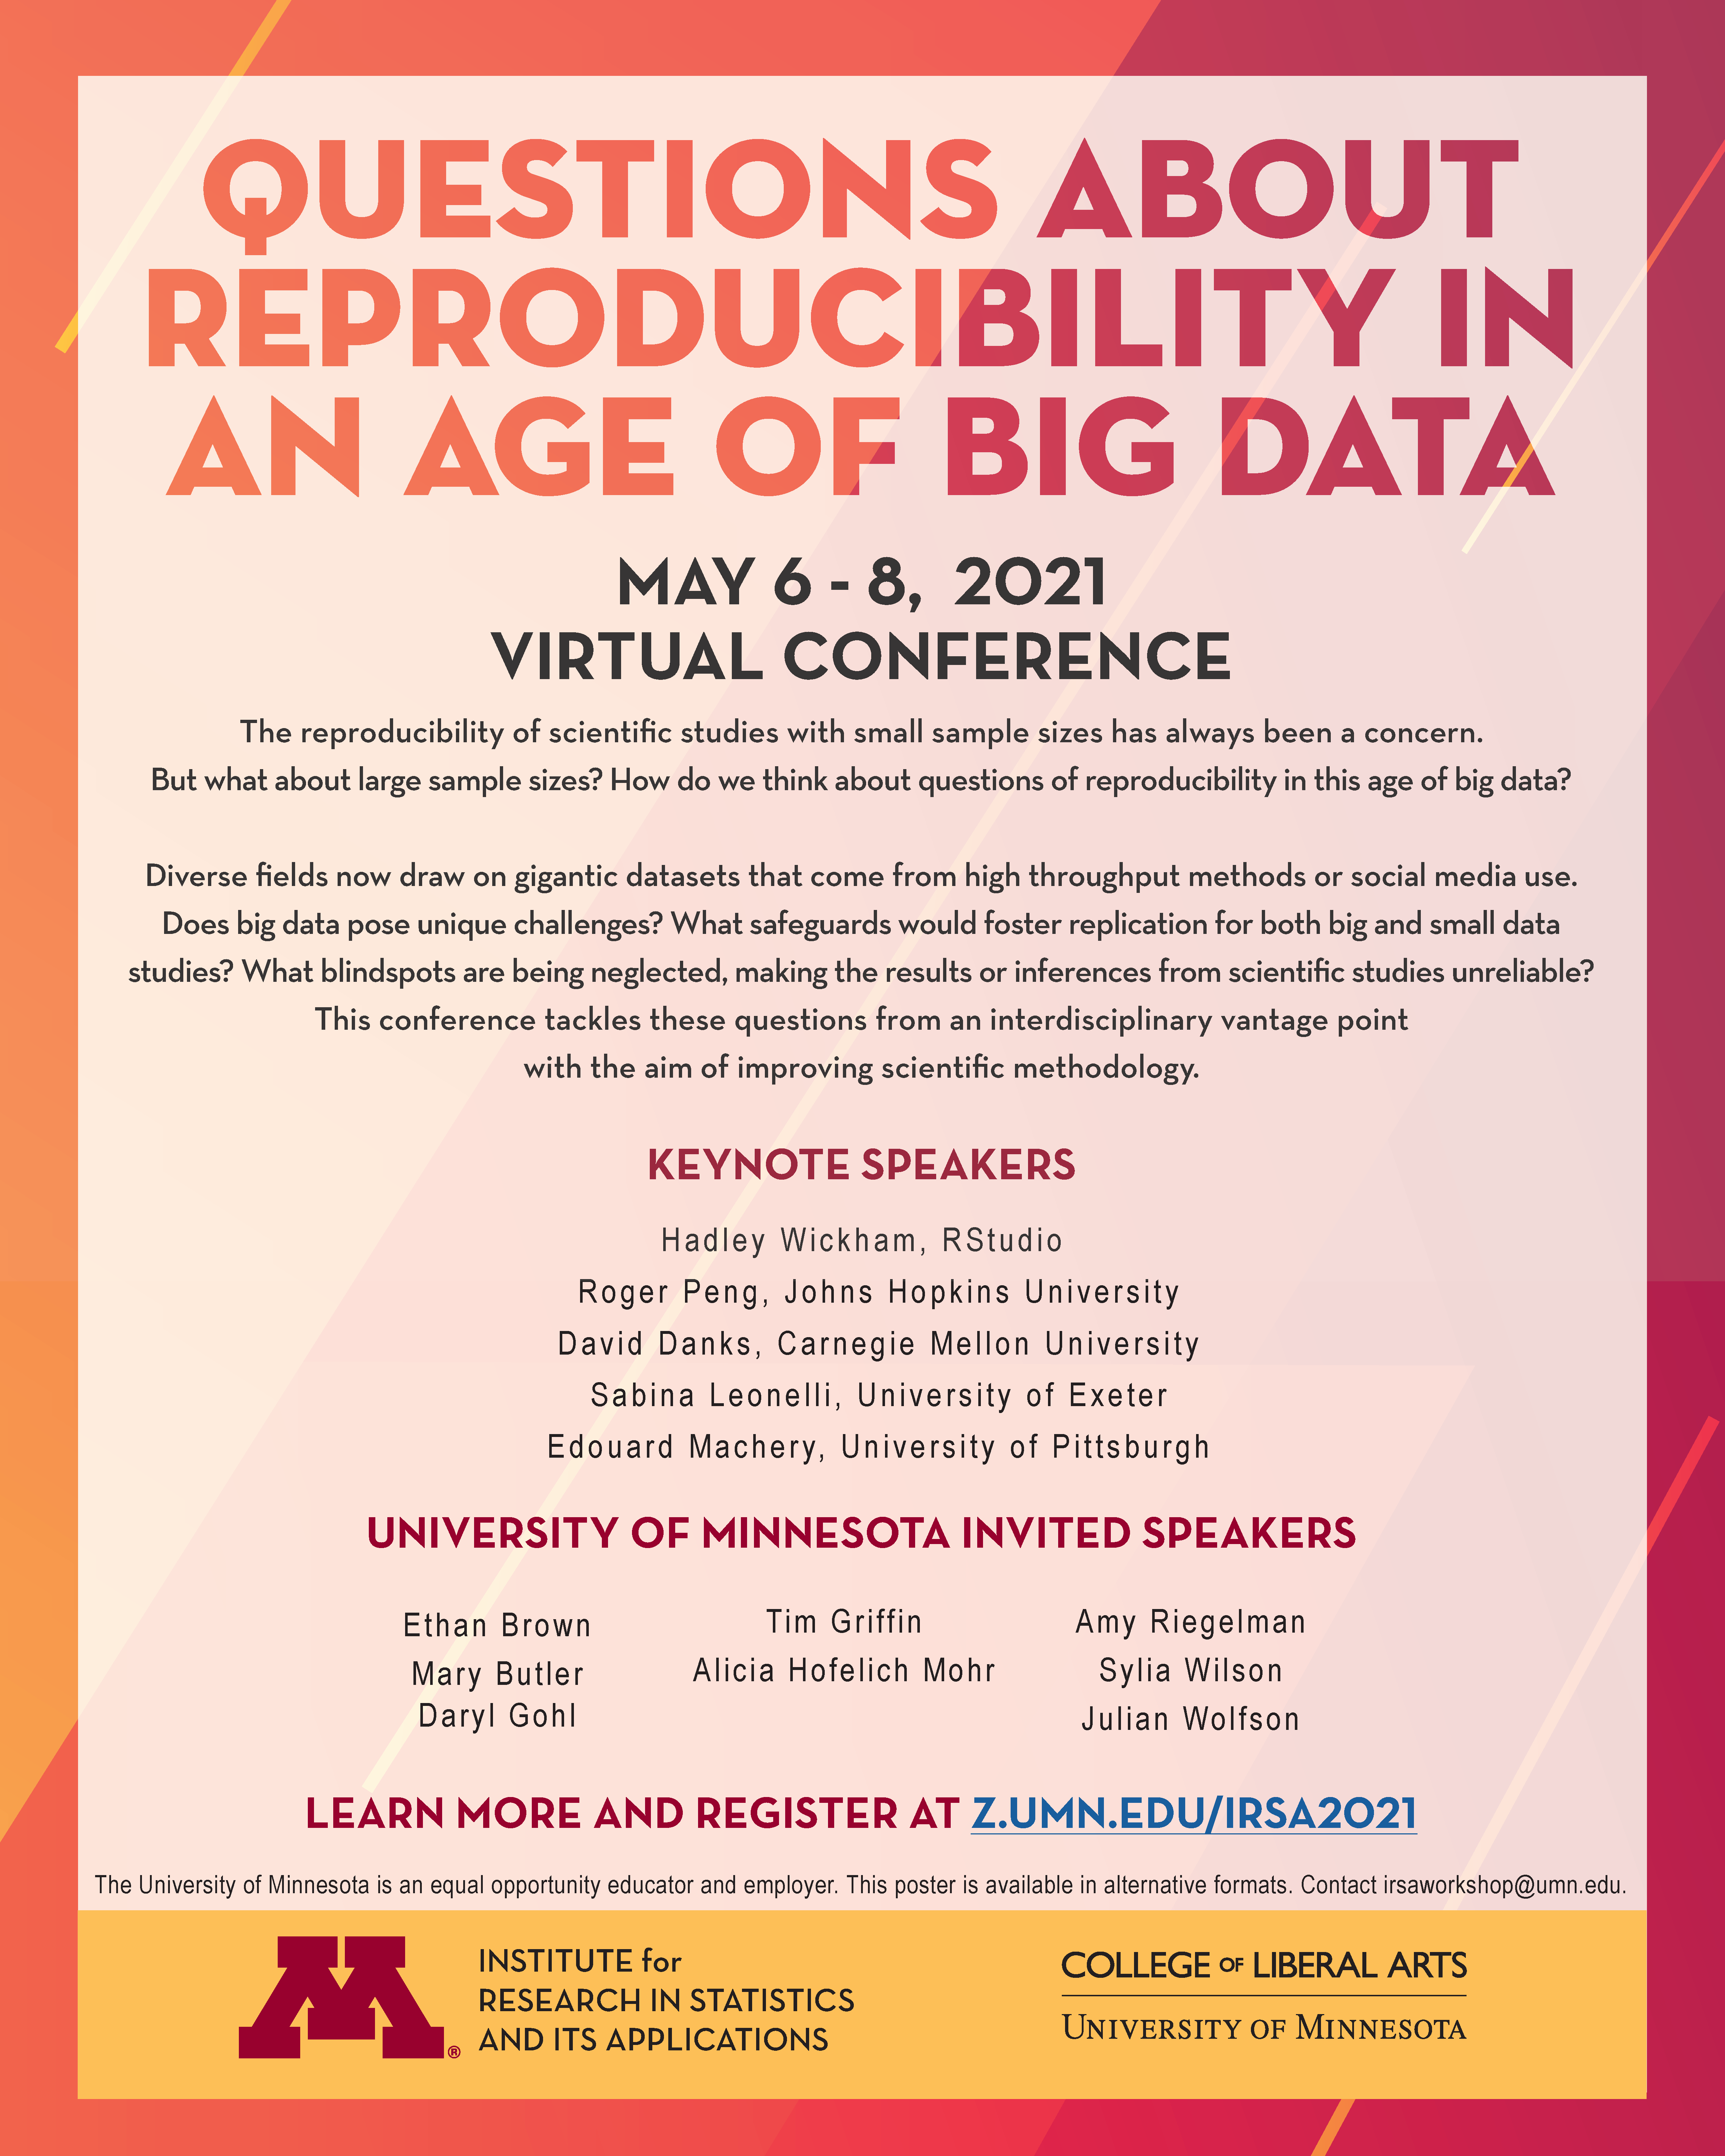 Event flyer for Questions About Reproducibility in an Age of Big Data